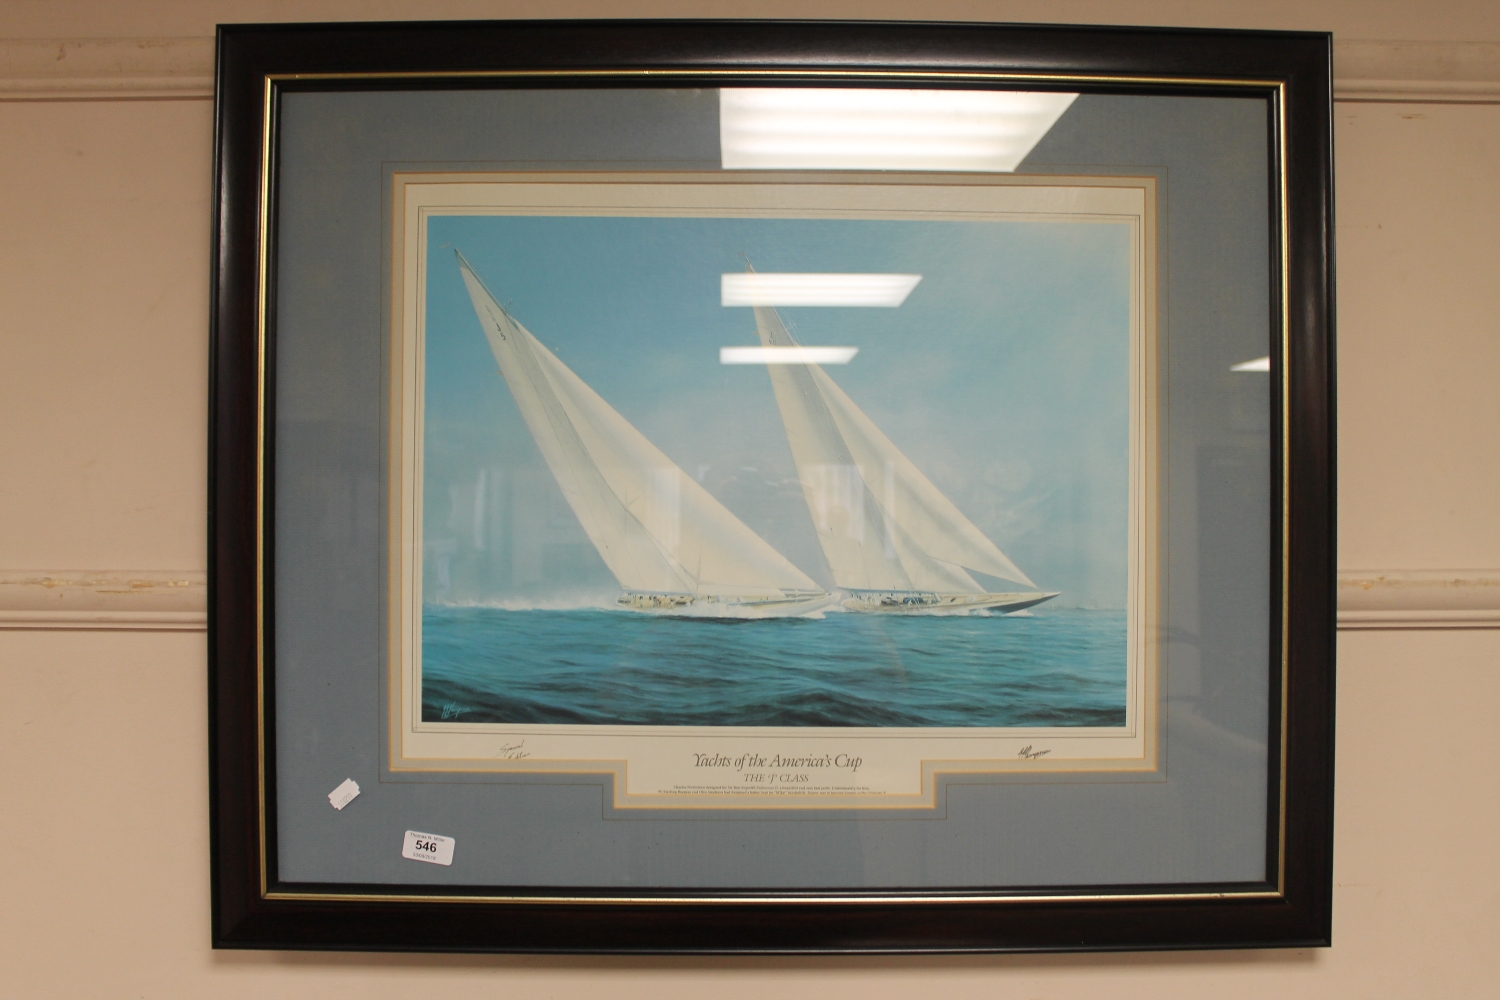 A special edition print "Yachts of The America's Cup The "J" Class",